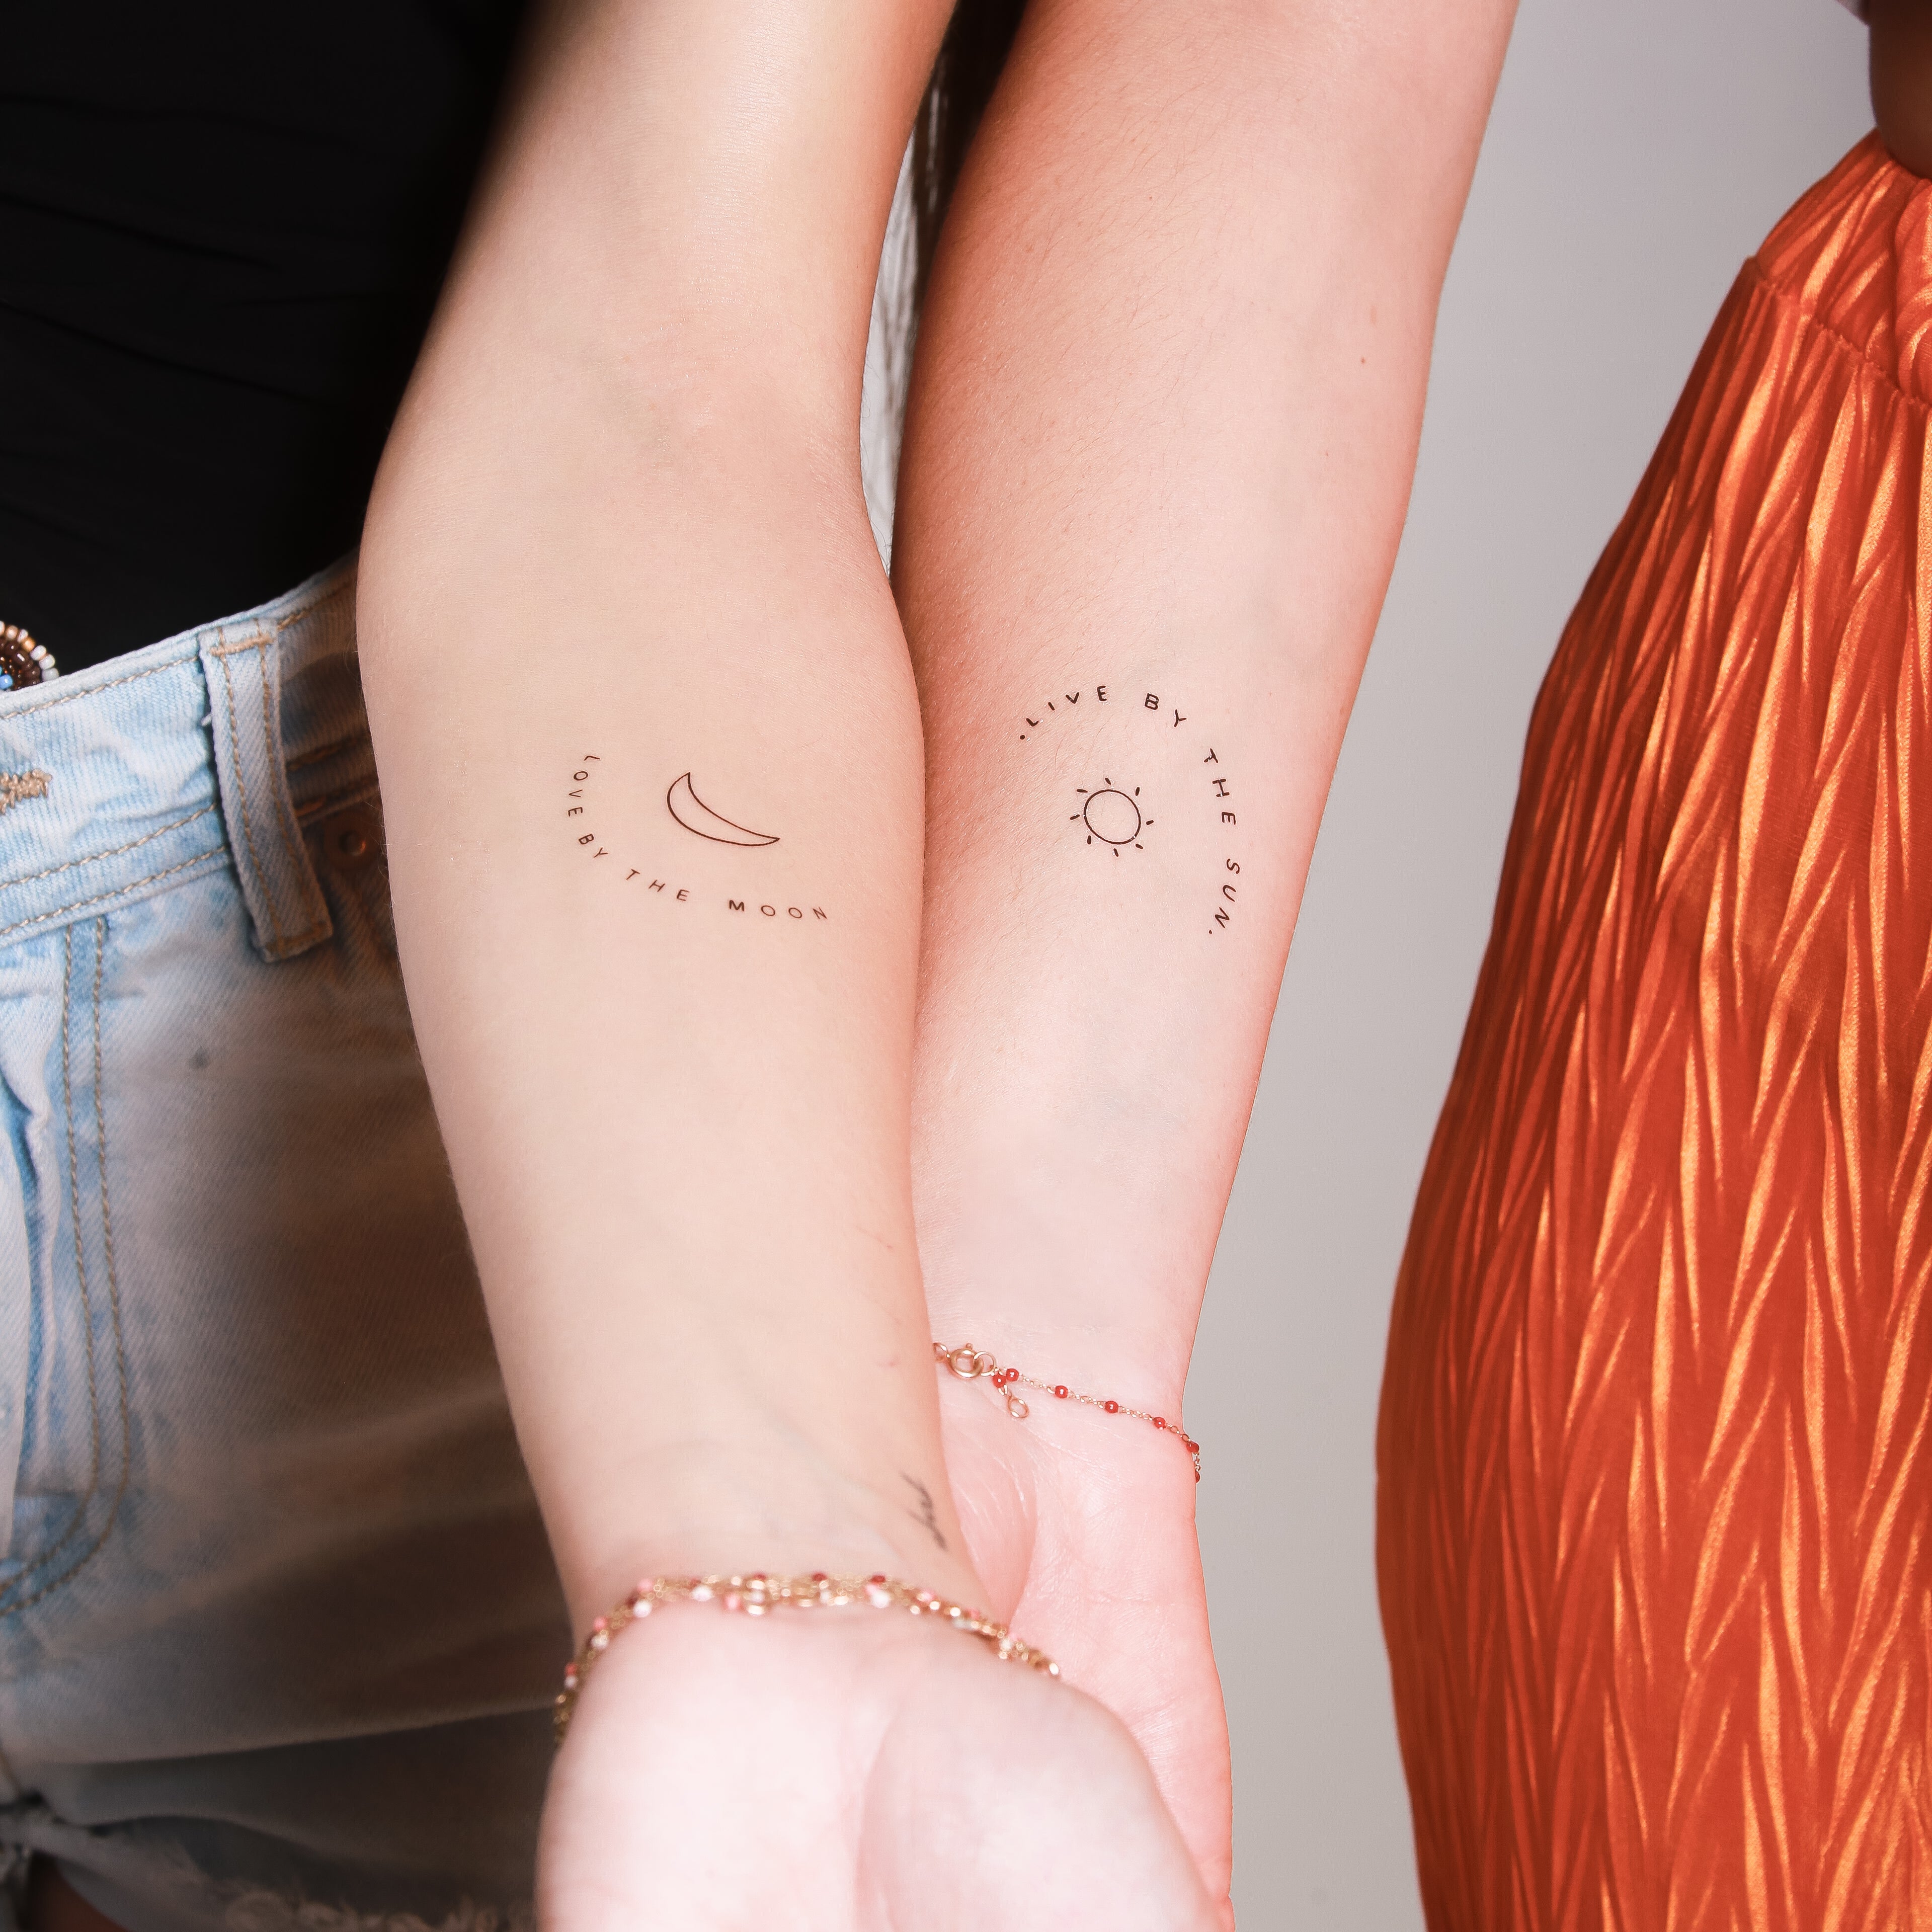 sun and moon tattoo matching - Google Search | ShopLook